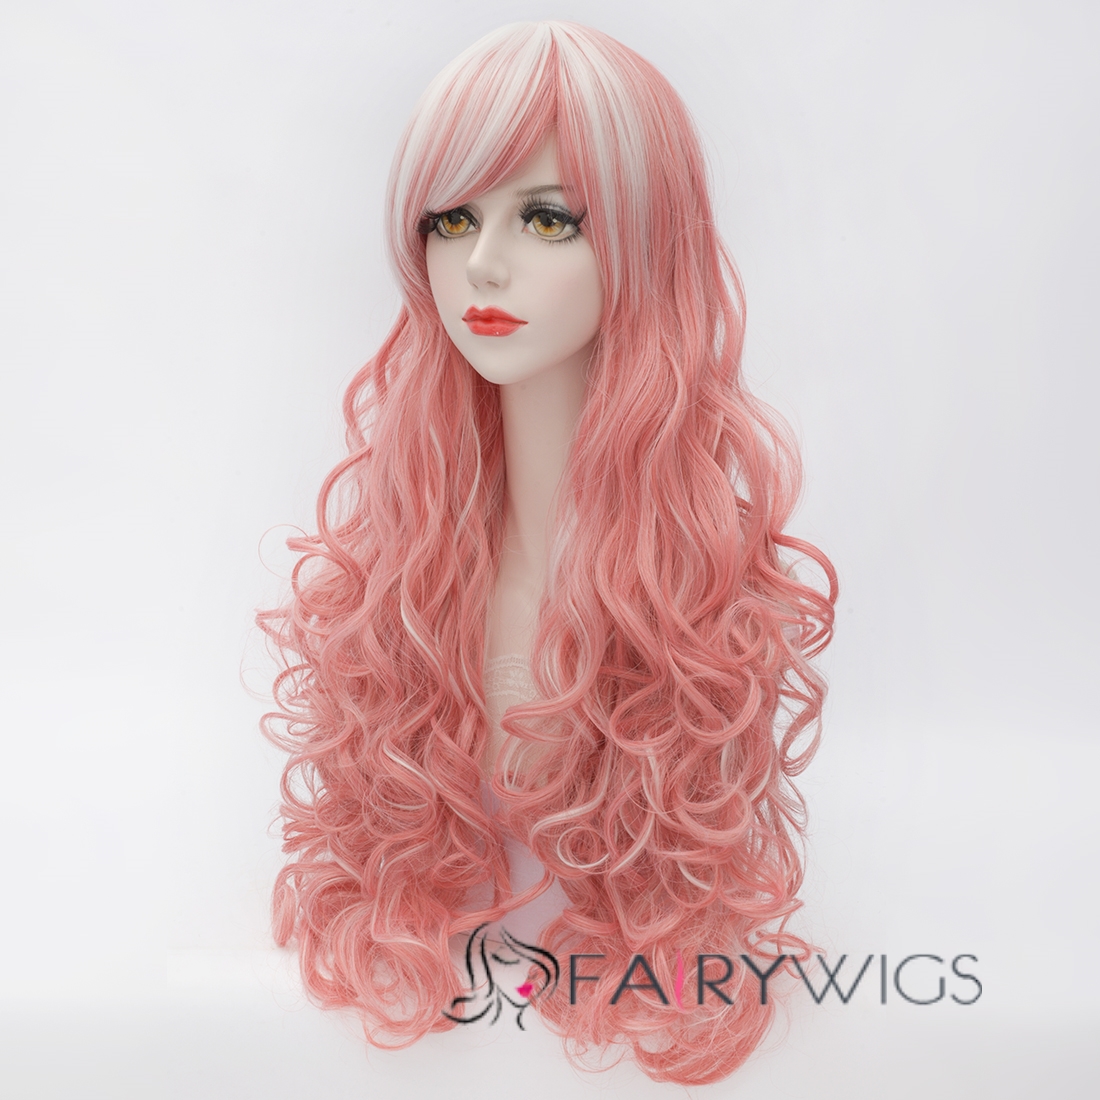 New Arrival Long Curly Pink with White Mixed Cosplay Wig